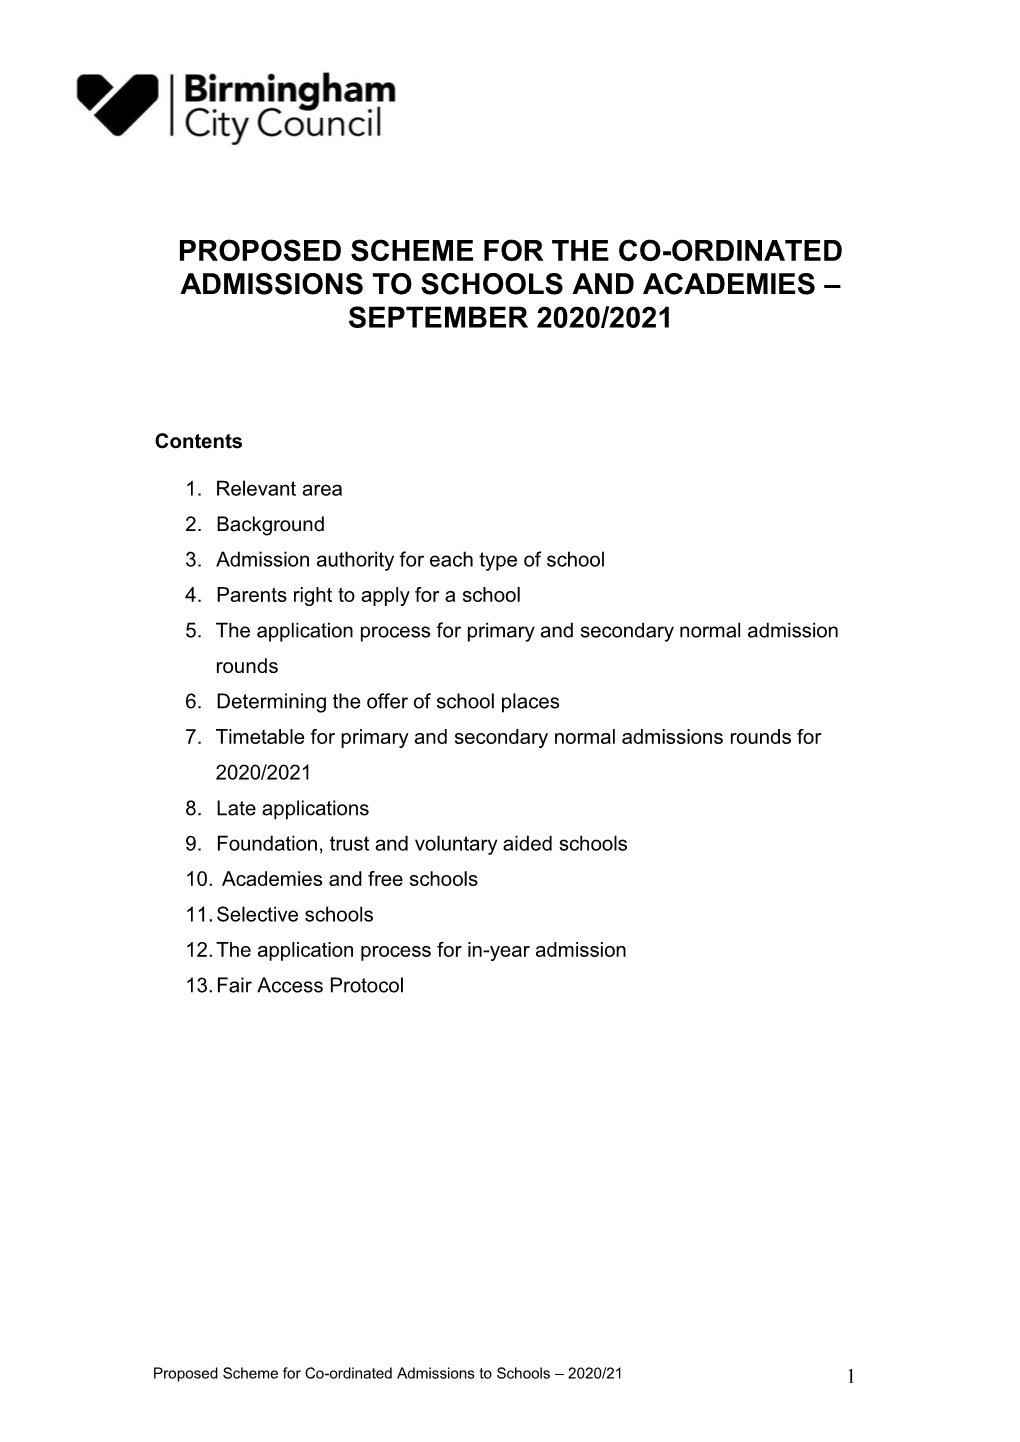 Proposed Scheme for the Co-Ordinated Admissions to Schools and Academies – September 2020/2021